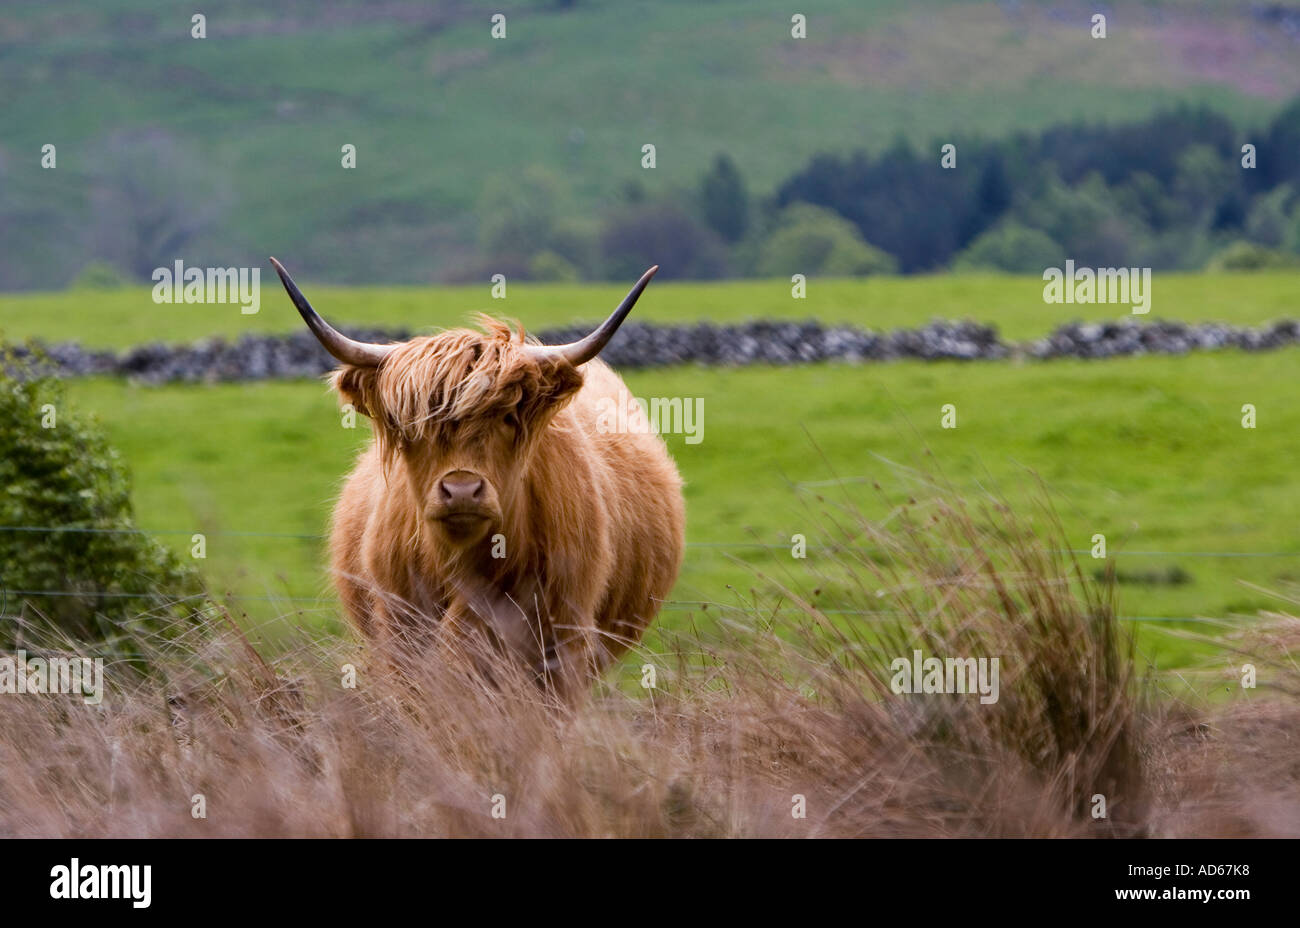 Bos taurus. Highland cow in a field in Scotland Stock Photo